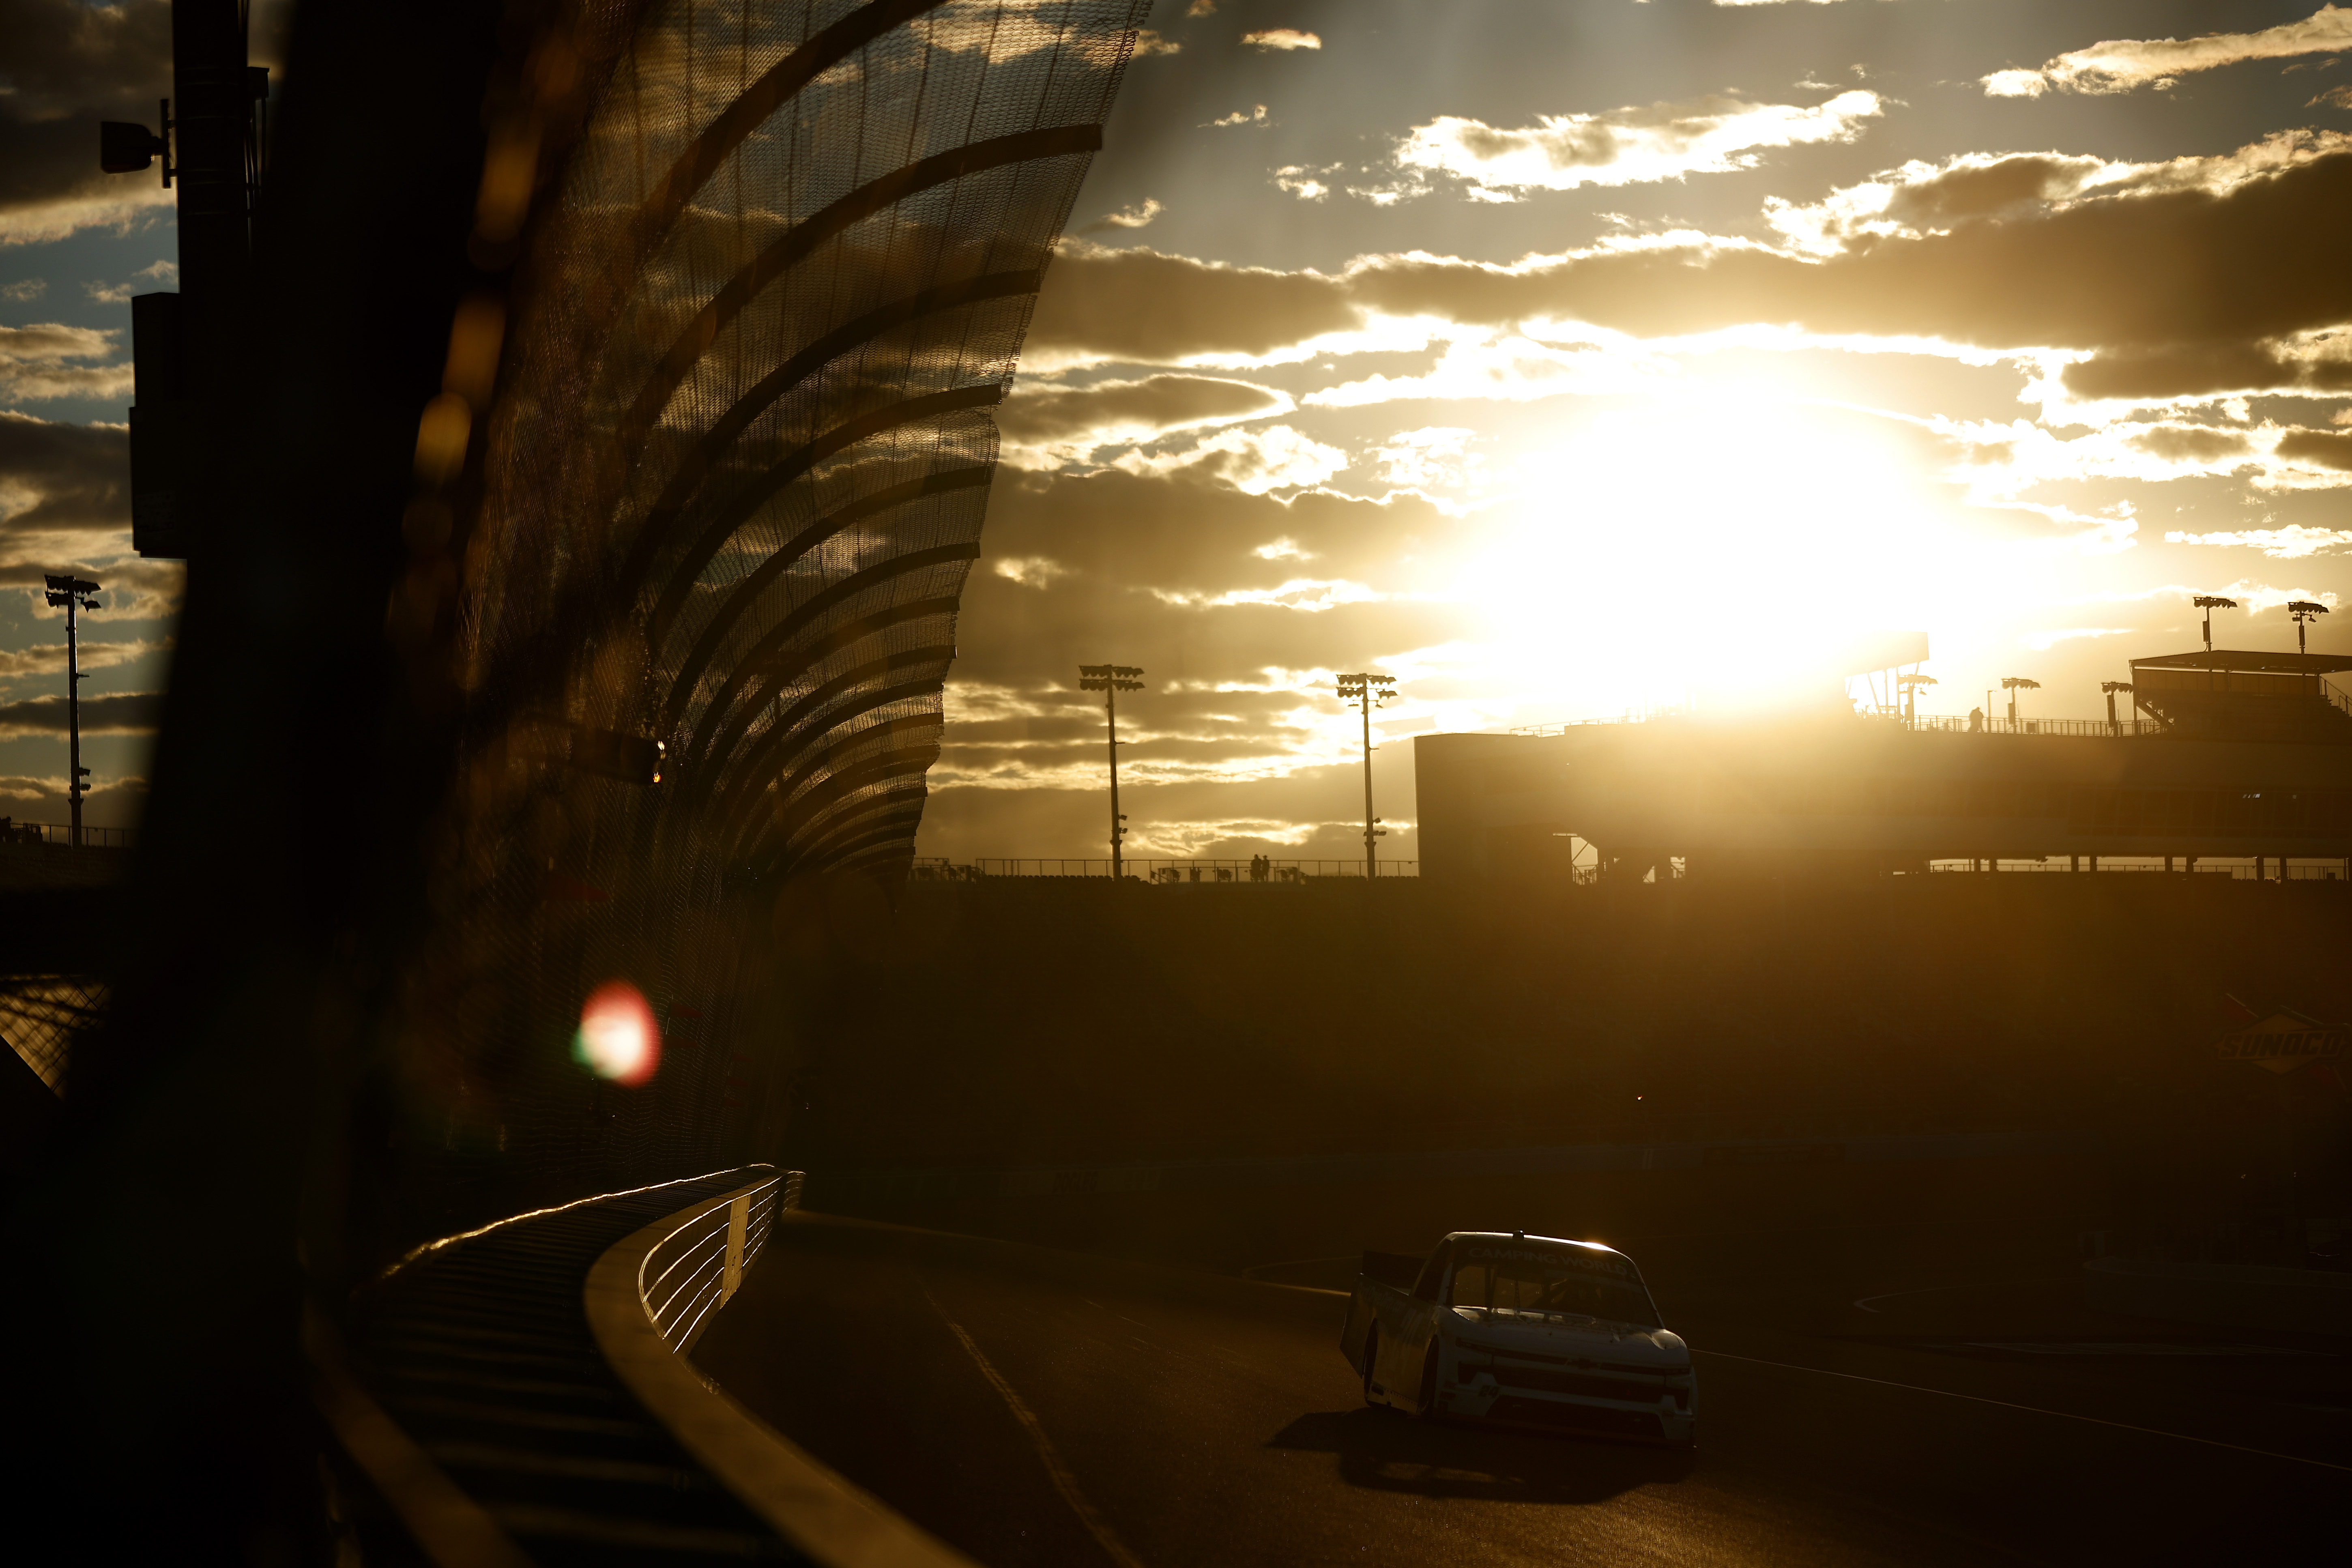 A general view of drivers as the sun sets during practice for the NASCAR Camping World Truck Series Lucas Oil 150 at Phoenix Raceway on November 03, 2022 in Avondale, Arizona.